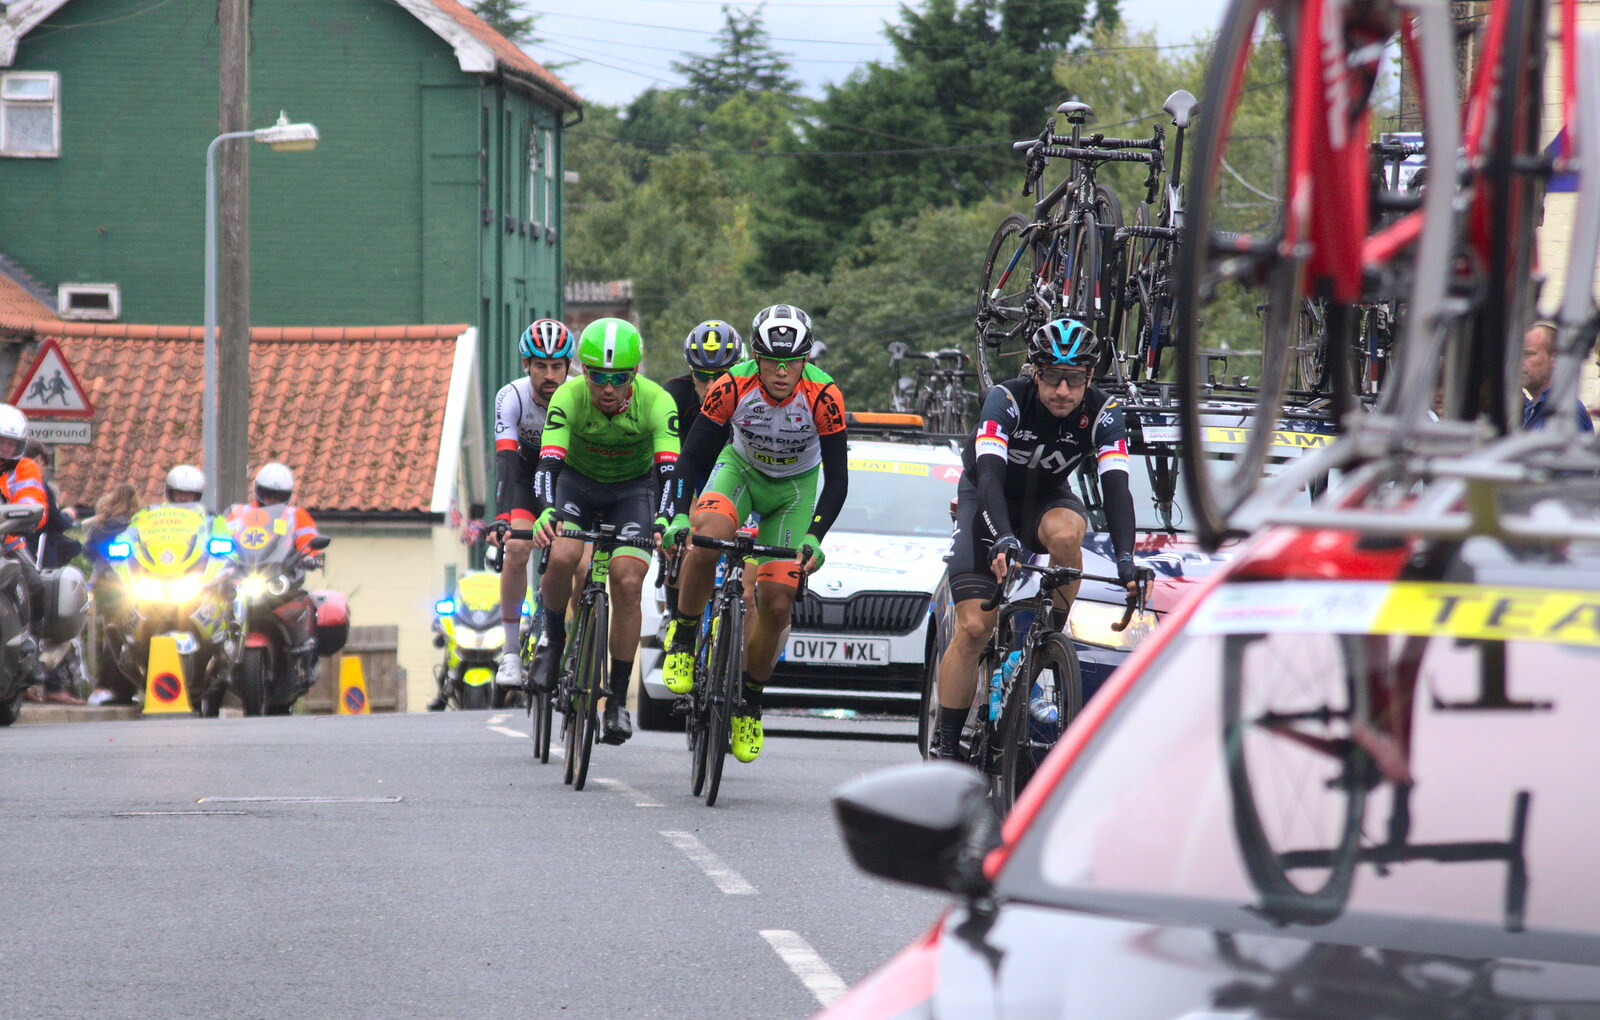 A few stragglers bring up the rear from The Tour of Britain Does Eye, Suffolk - 8th September 2017